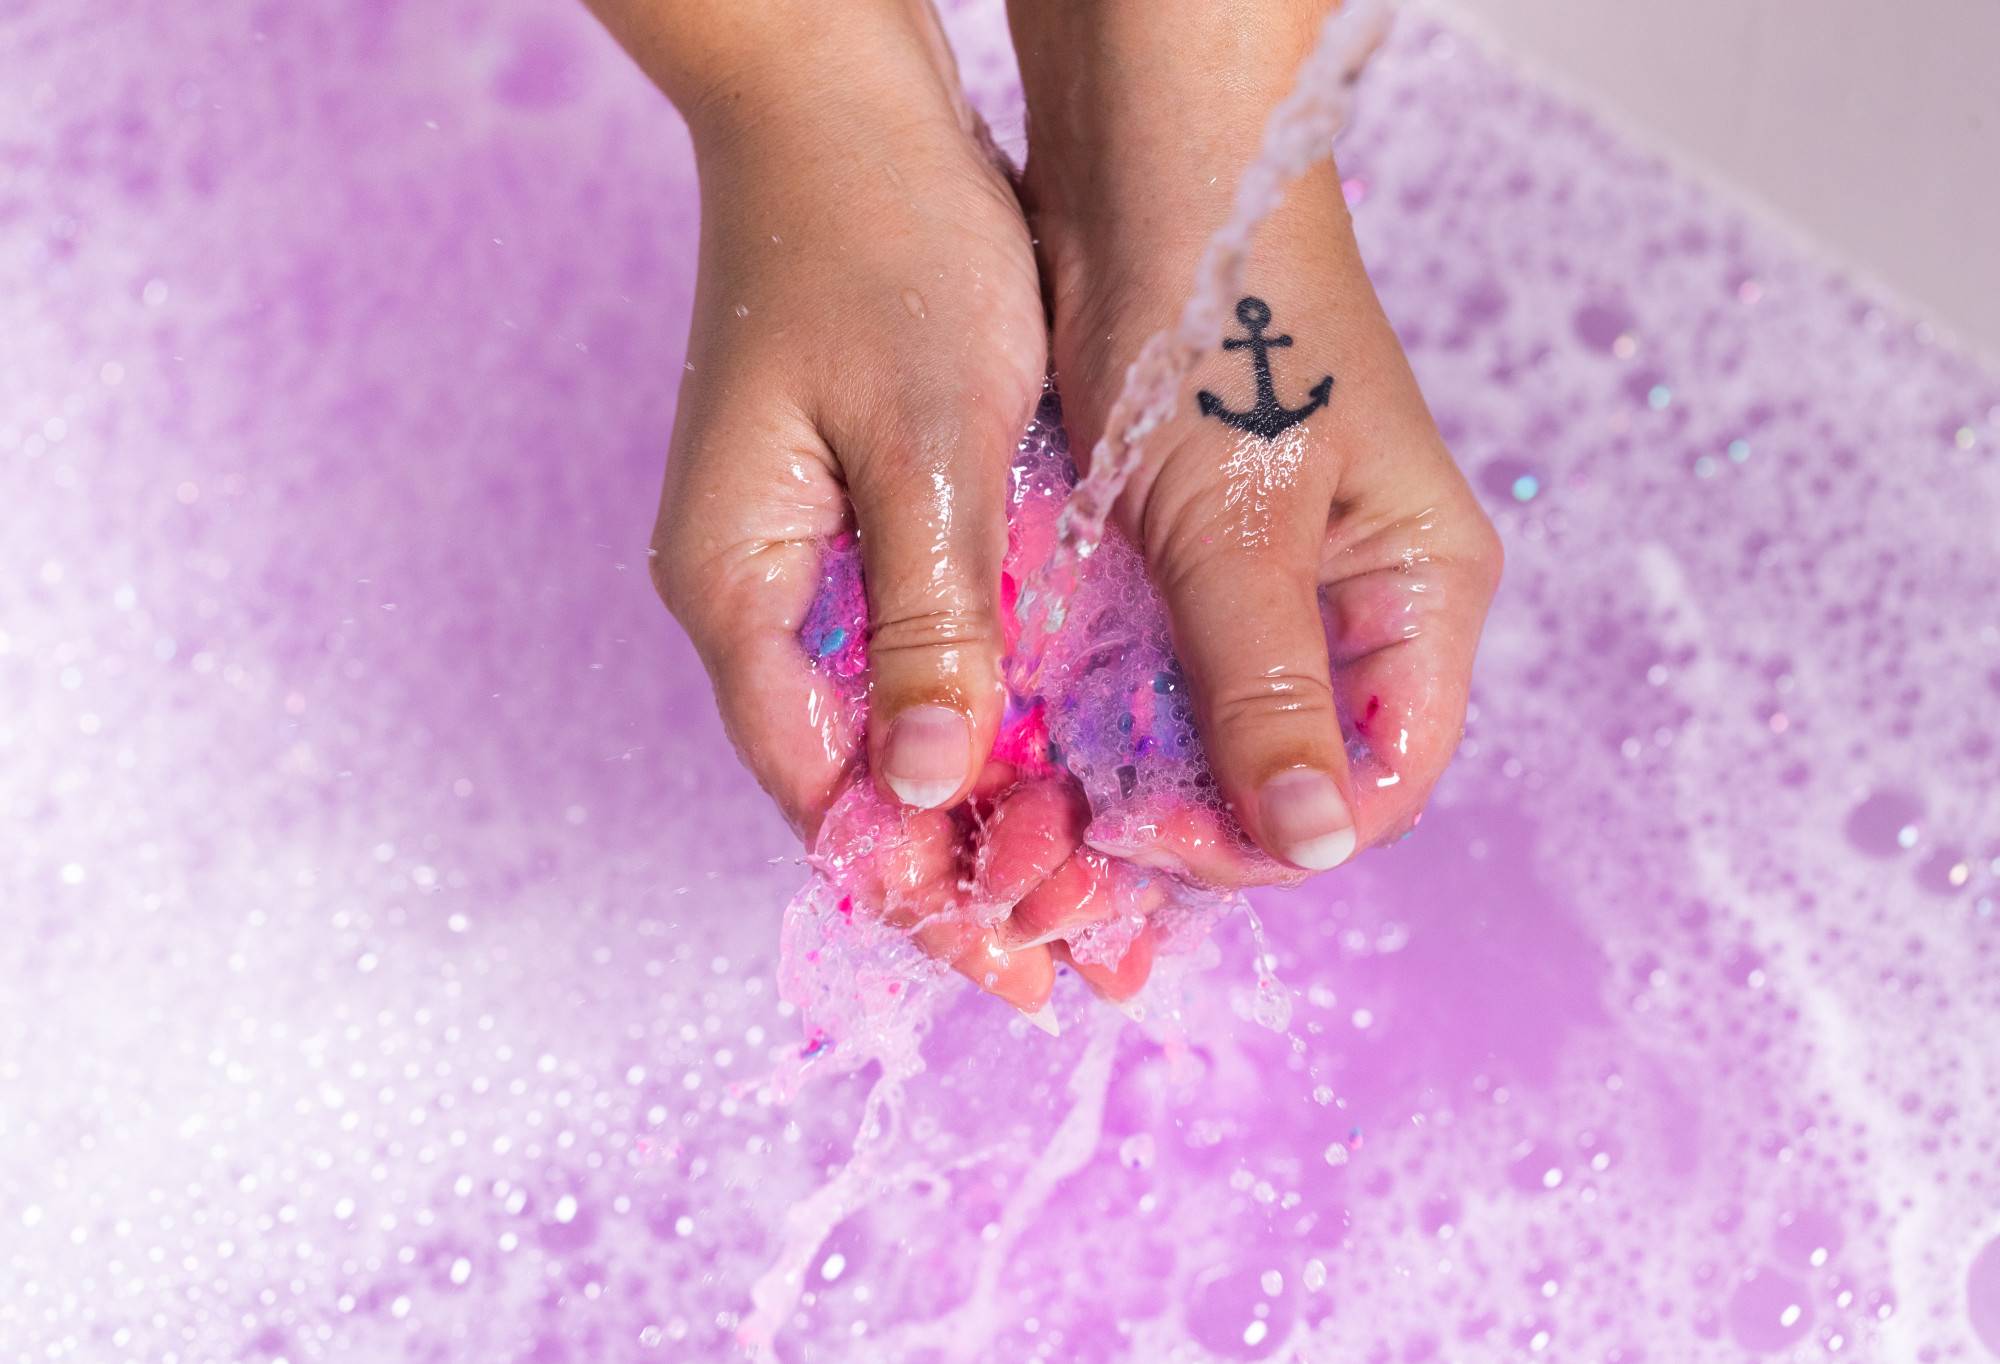 A hand with a tattoo has crumbled the pink-purple Sleepy under running water. In the background purple water and bubbles form.